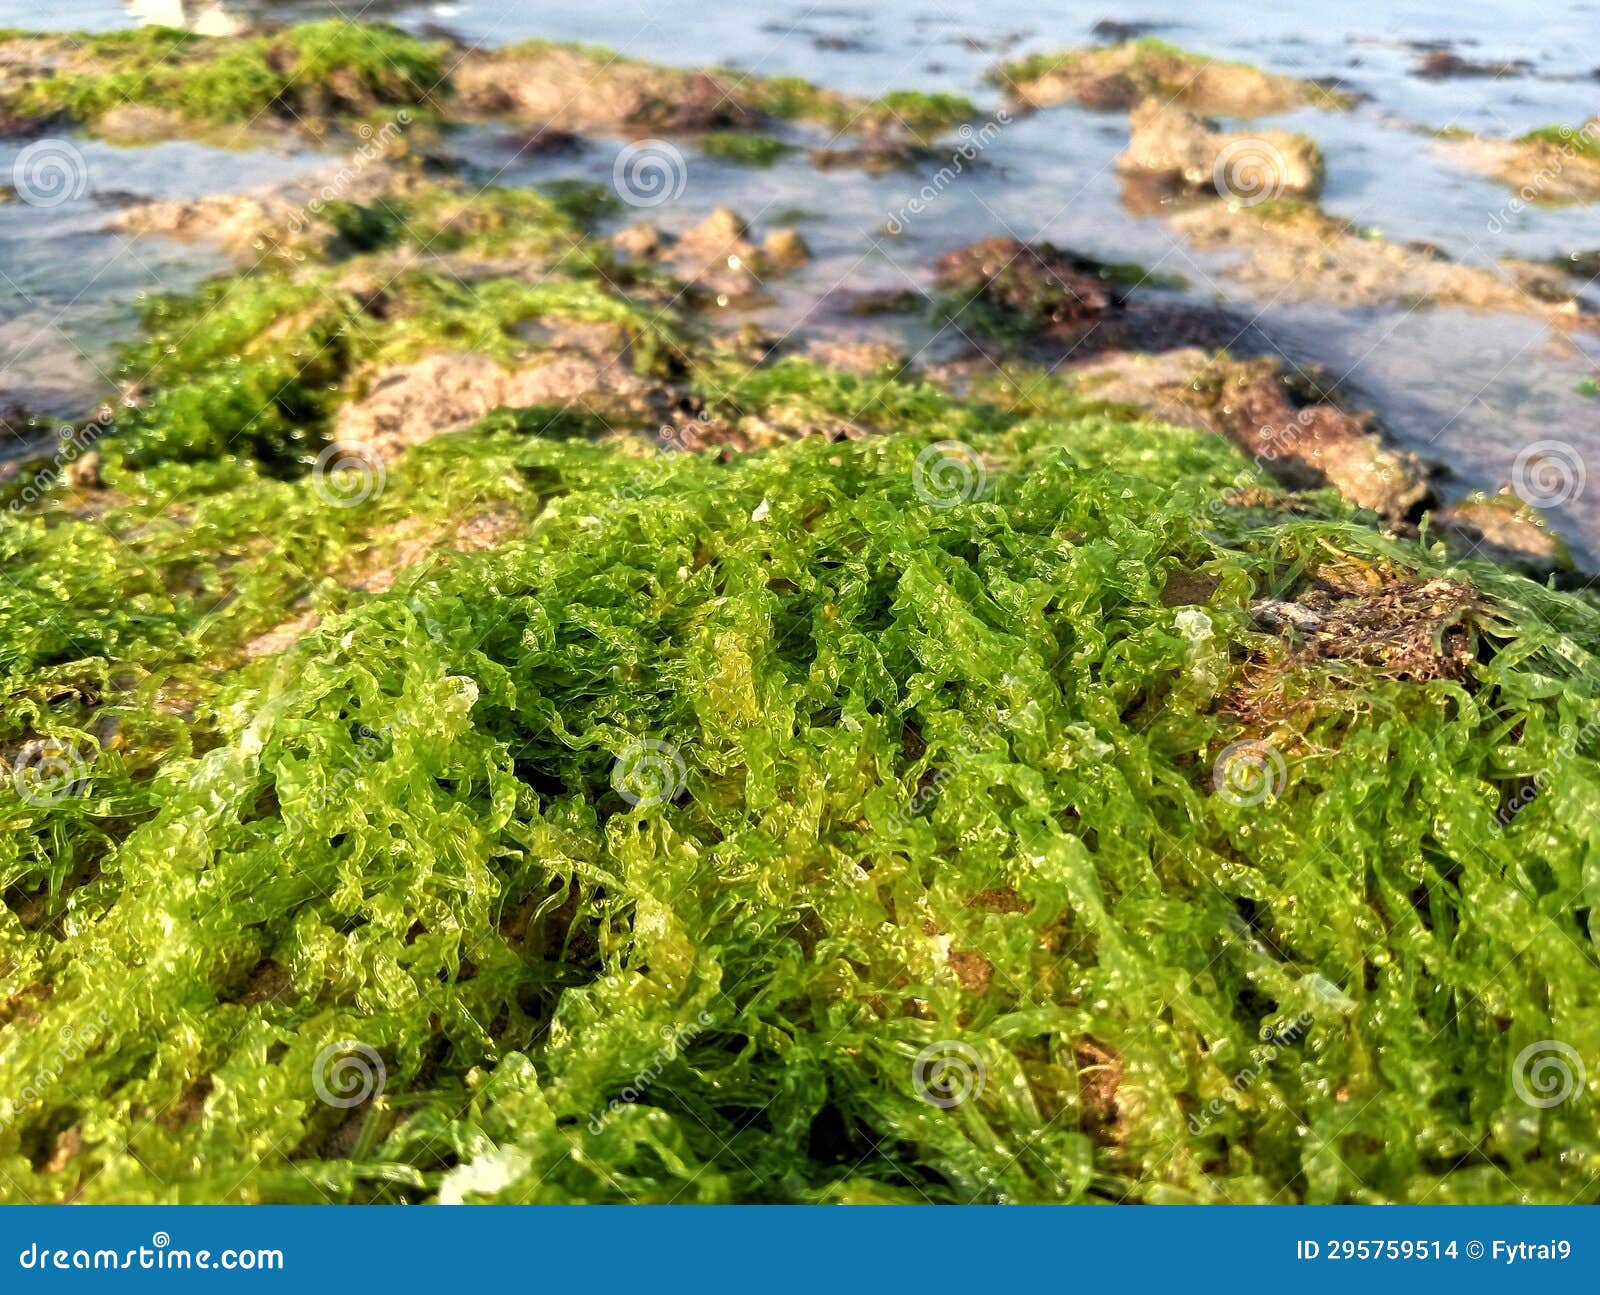 moss scattered when the sea water recedes